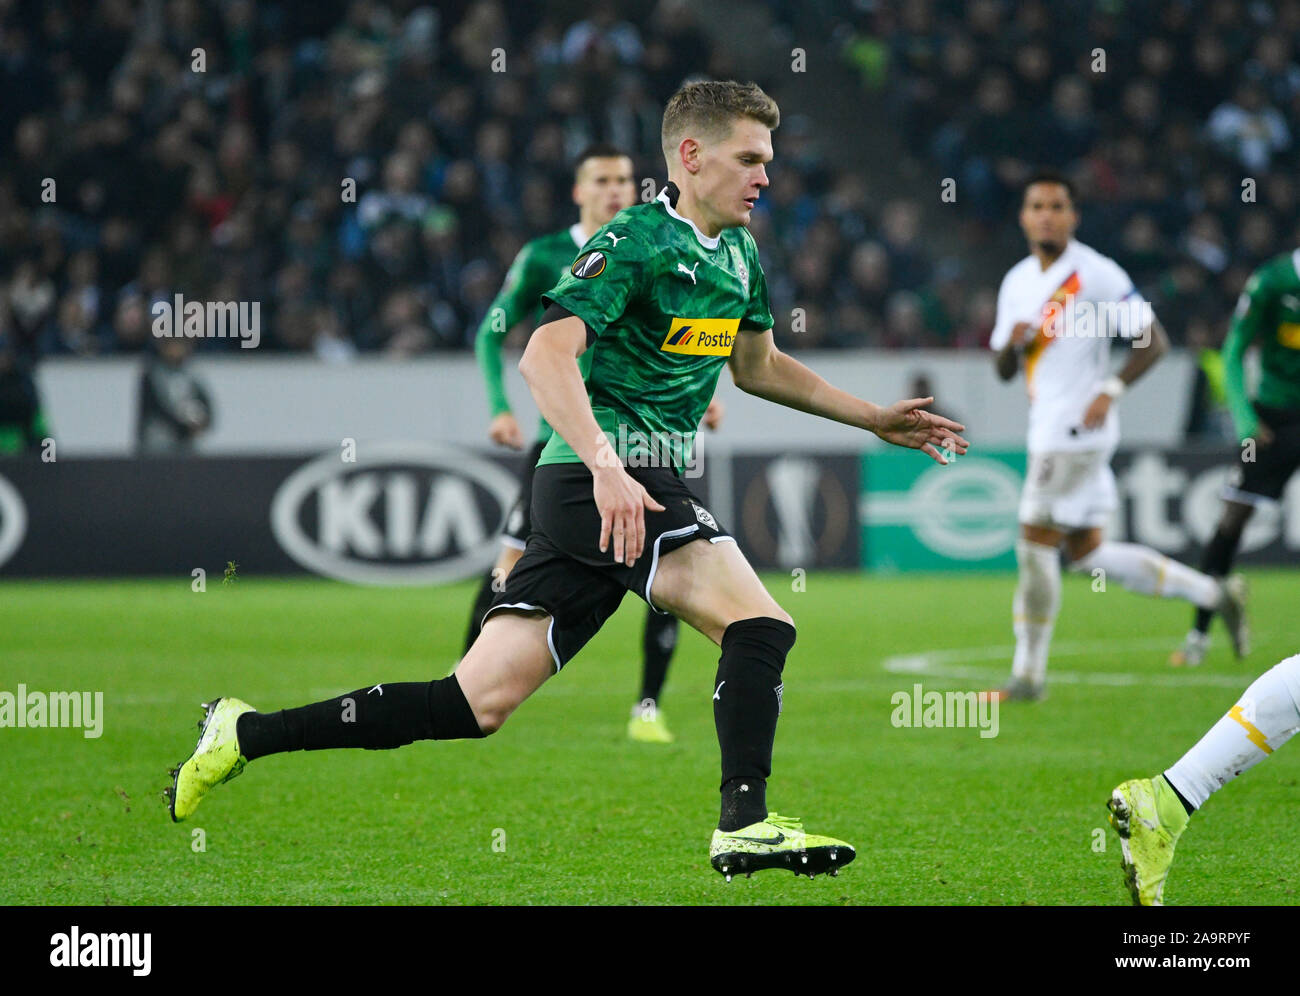 Borussia Park Monchengladbach, 7.11.2019,  Football: Europe League  Season 2019/20, matchday 4, Borussia Monchengladbach (MGL) vs. AS Rom (ROM):  Matthias Ginter (MGL)  UEFA REGULATIONS PROHIBIT ANY USE OF PHOTOGRAPHS AS IMAGE SEQUENCES AND/OR QUASI-VIDEO Stock Photo